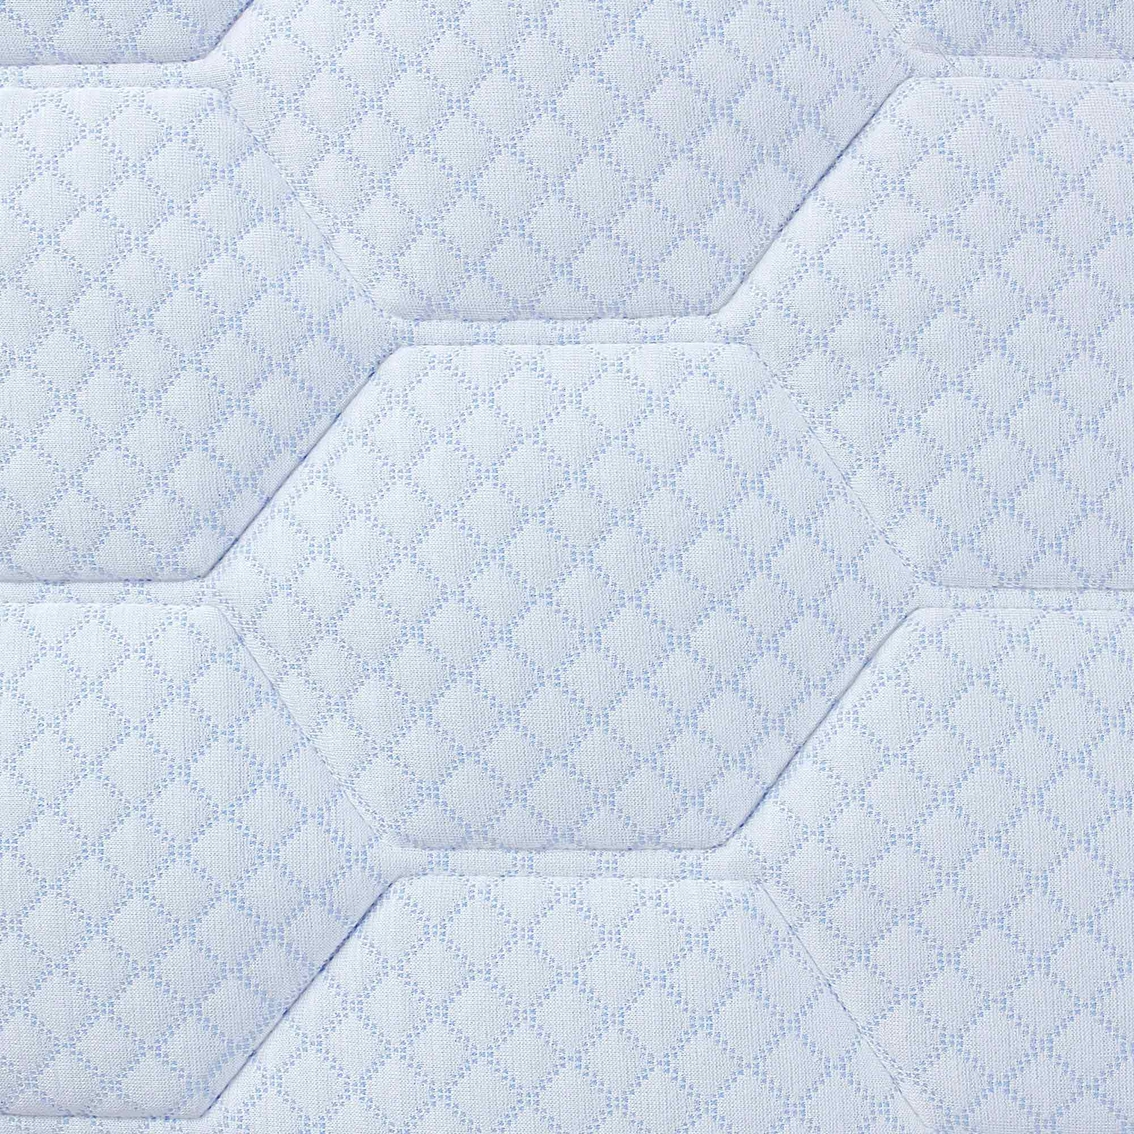 Arctic Sleep by Pure Rest Cooling Gel Memory Foam Mattress Pad The Cooling Gel - Image 4 of 4